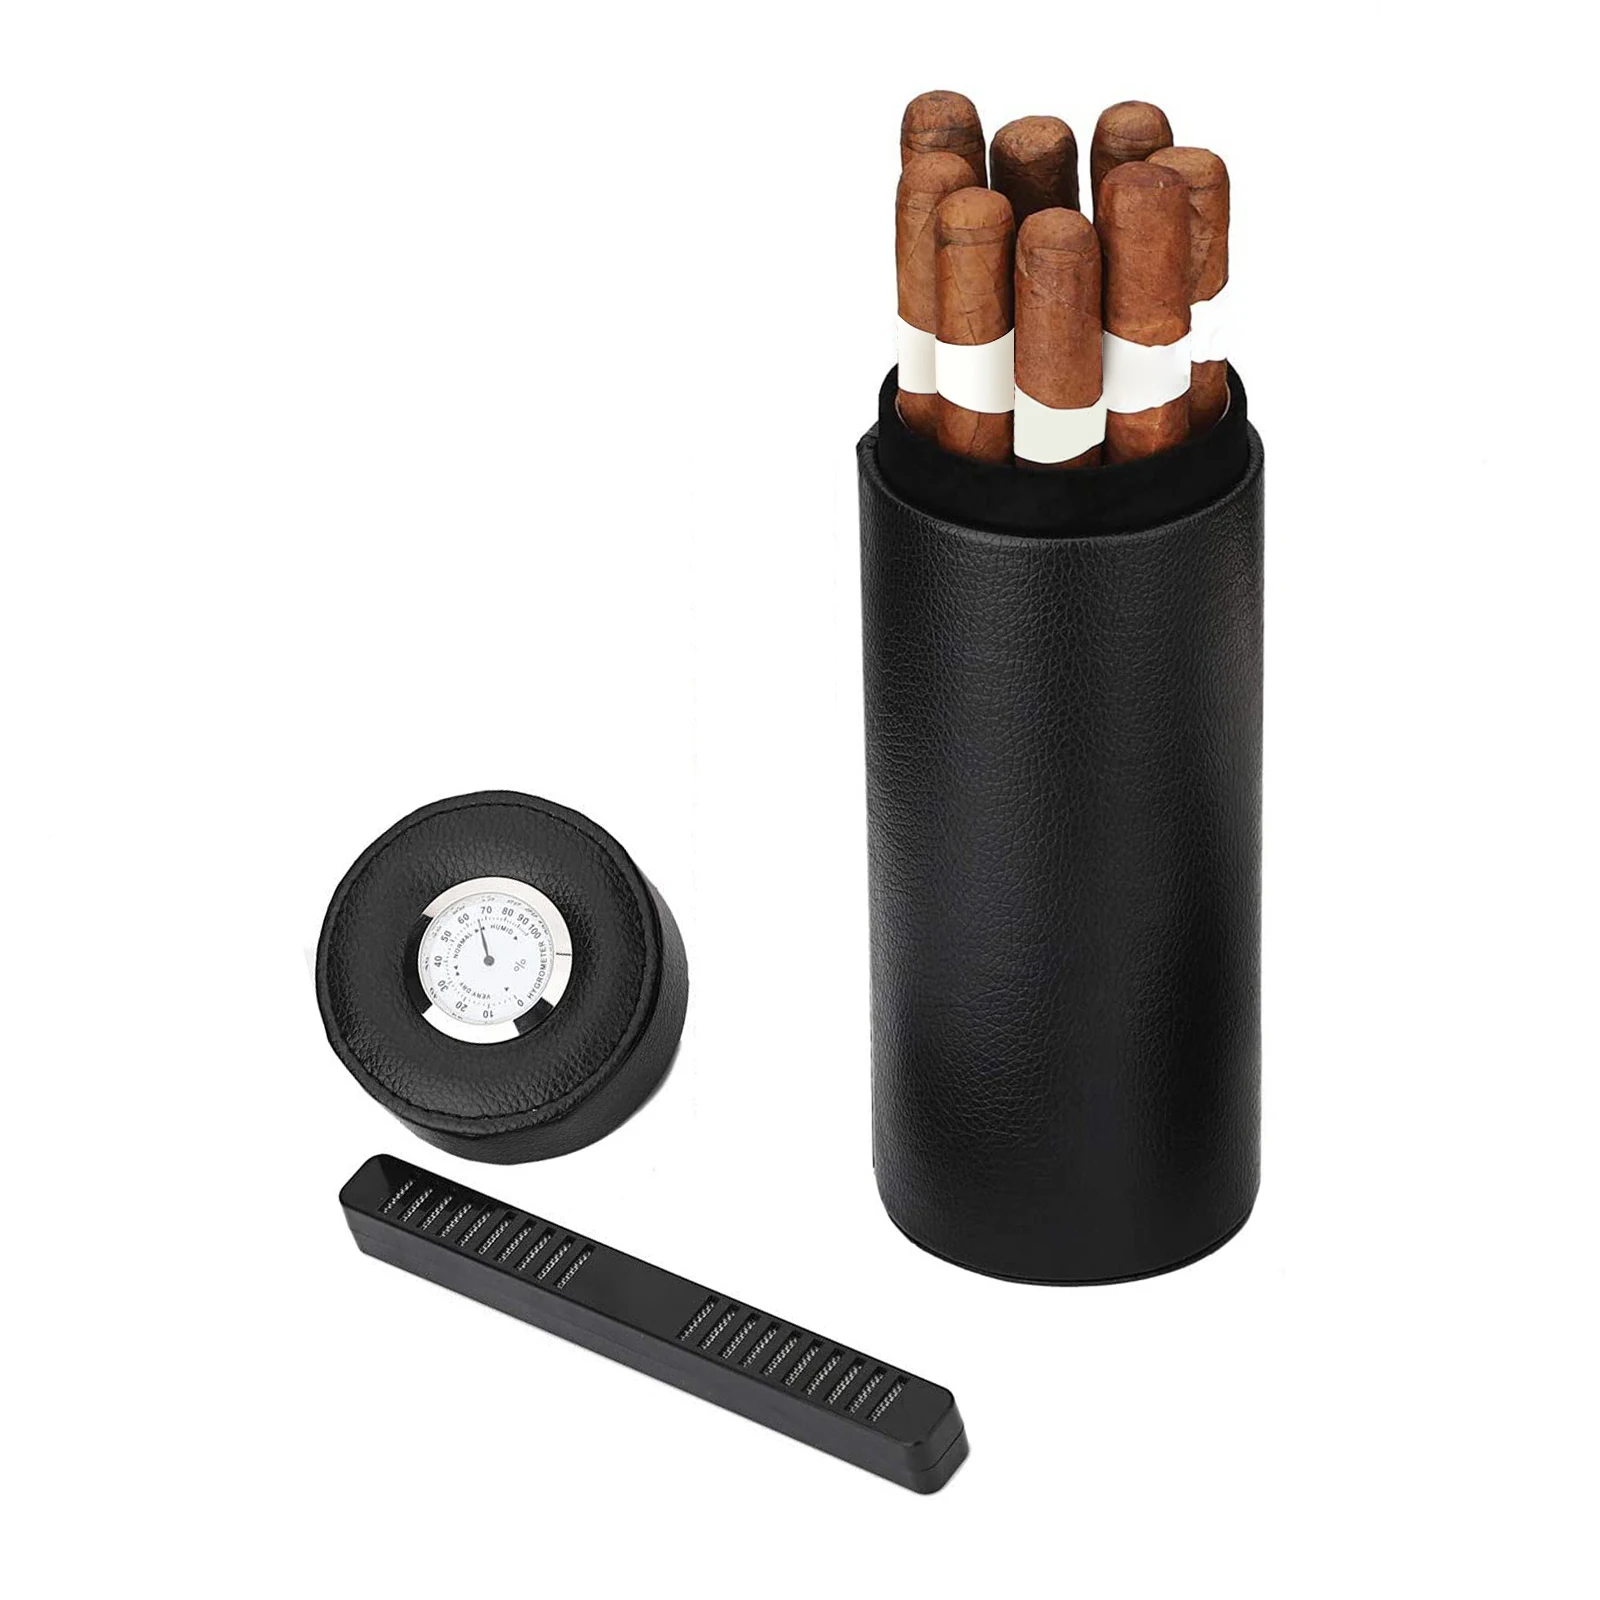 Leather Cigar Case Black Portable Travel Cigar Humidor Waterproof 5-8 Tubes Holder Humidifier Storage Carrying Case